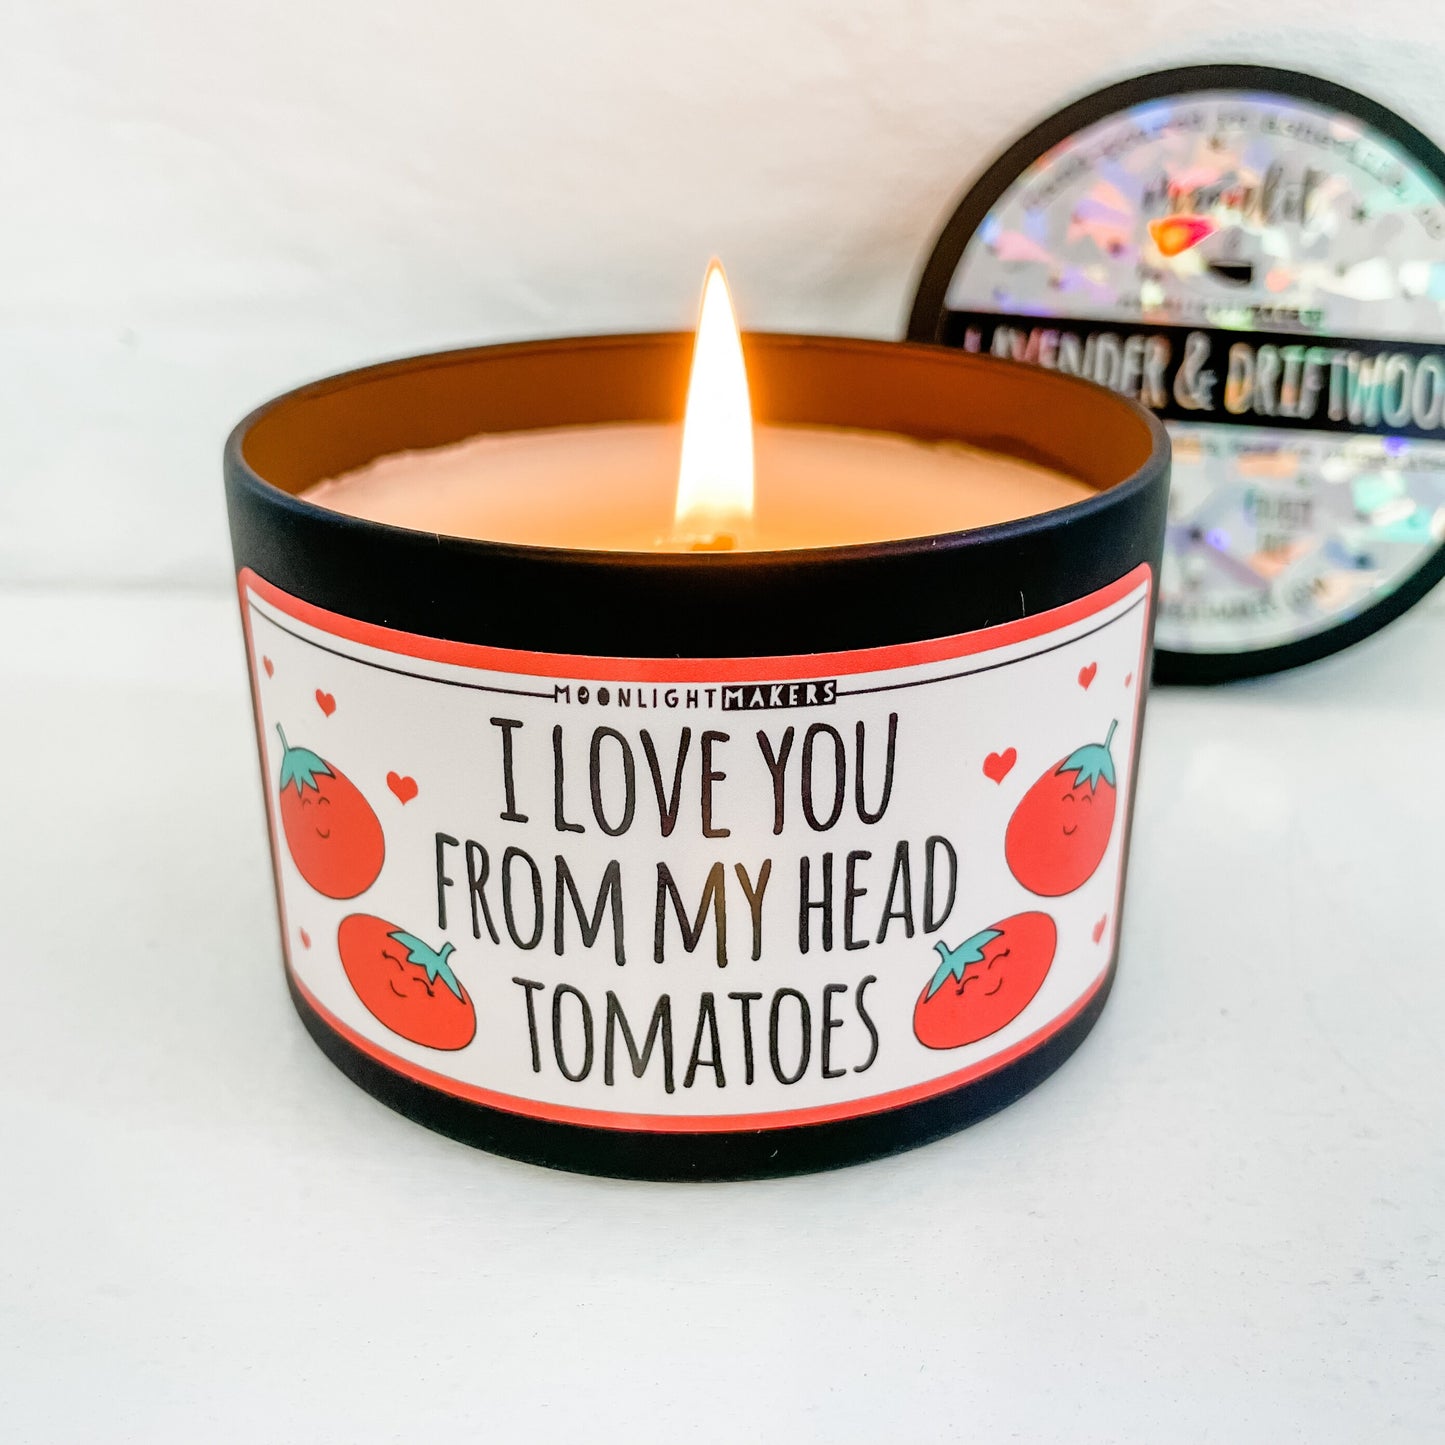 I Love You From My Head Tomatoes - 8oz Candle - Choose Your Scent - 100% Natural Soy Wax